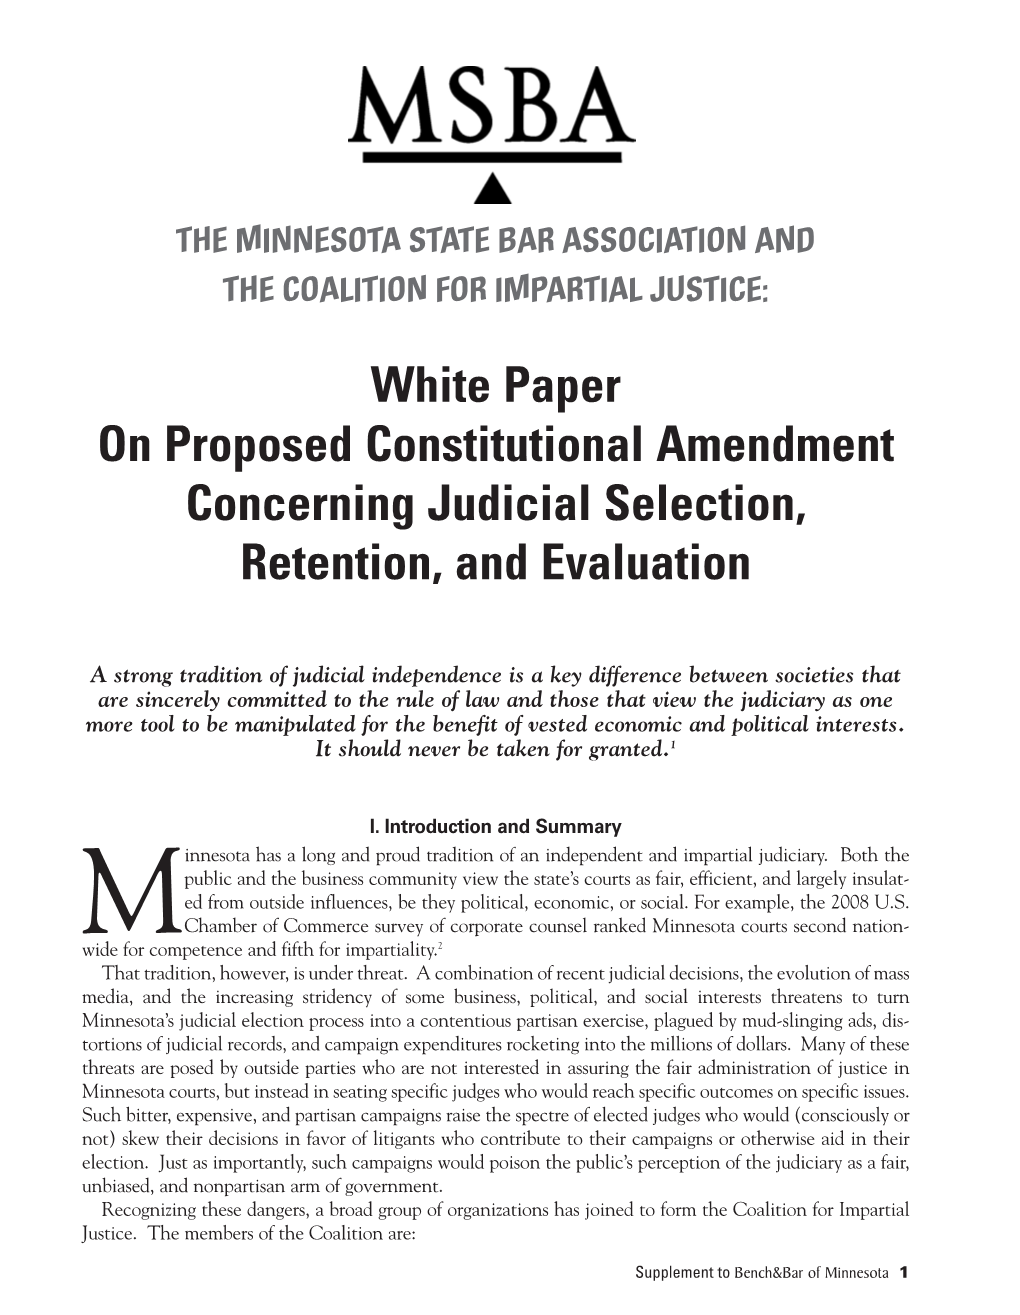 White Paper on Proposed Constitutional Amendment Concerning Judicial Selection, Retention, and Evaluation